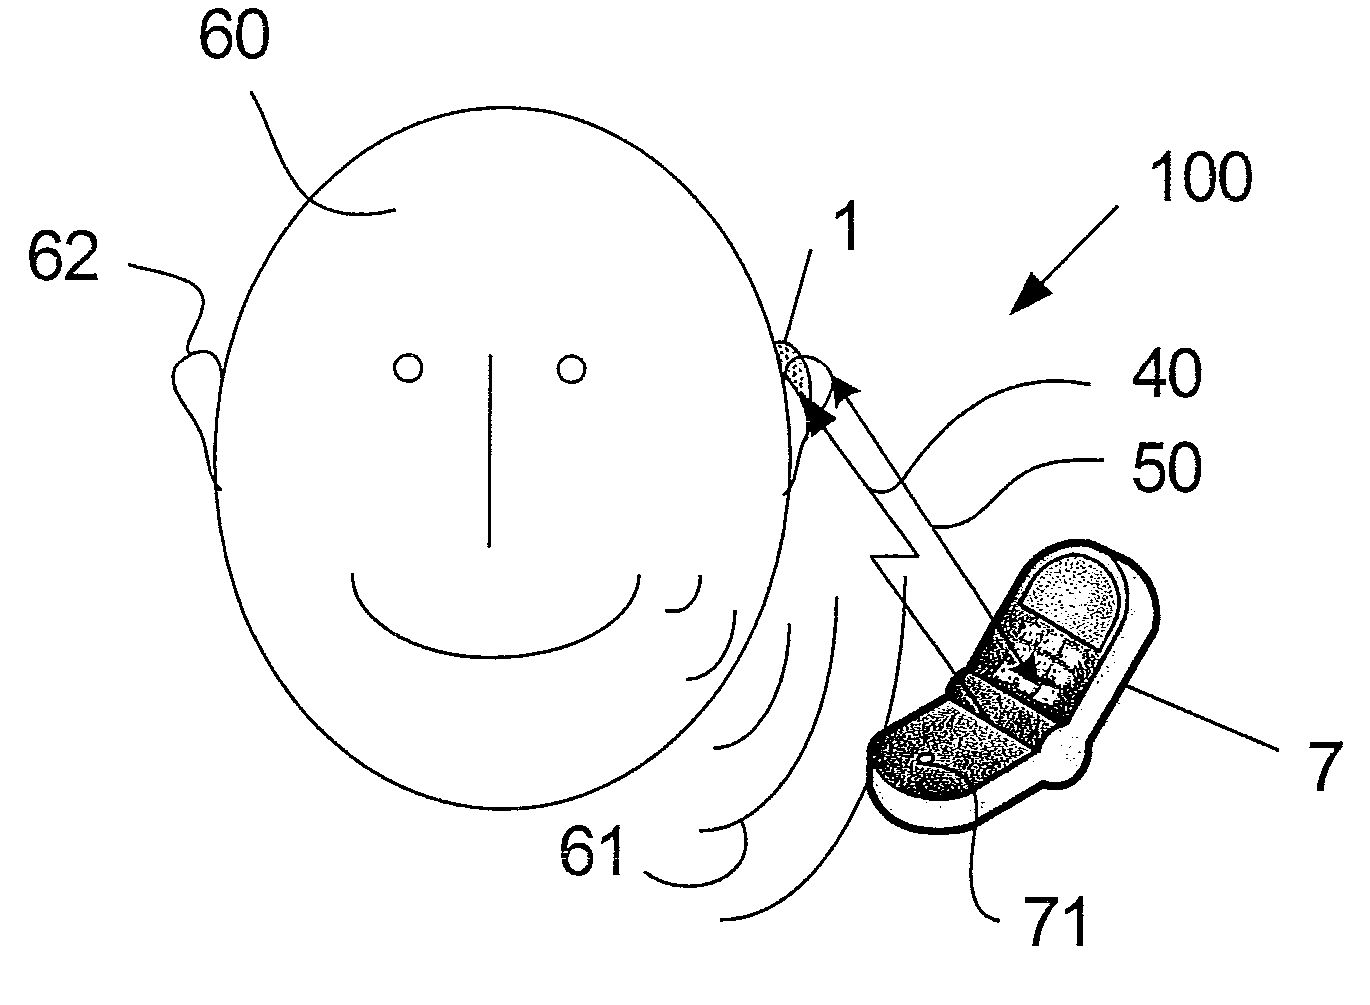 Hearing aid system with a low power wireless link between a hearing instrument and a telephone